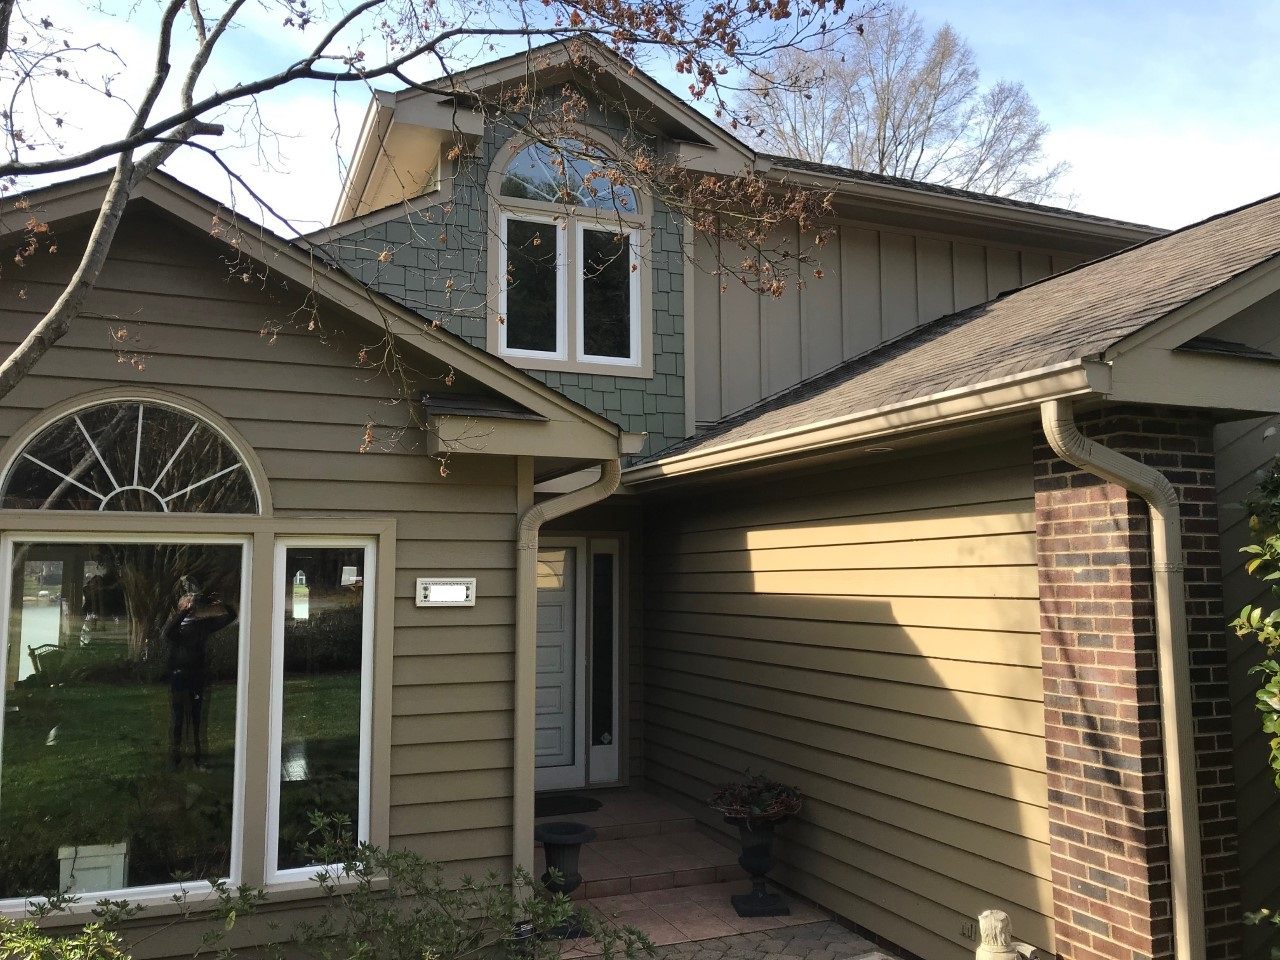 Hardie® Plank siding details mooresville nc